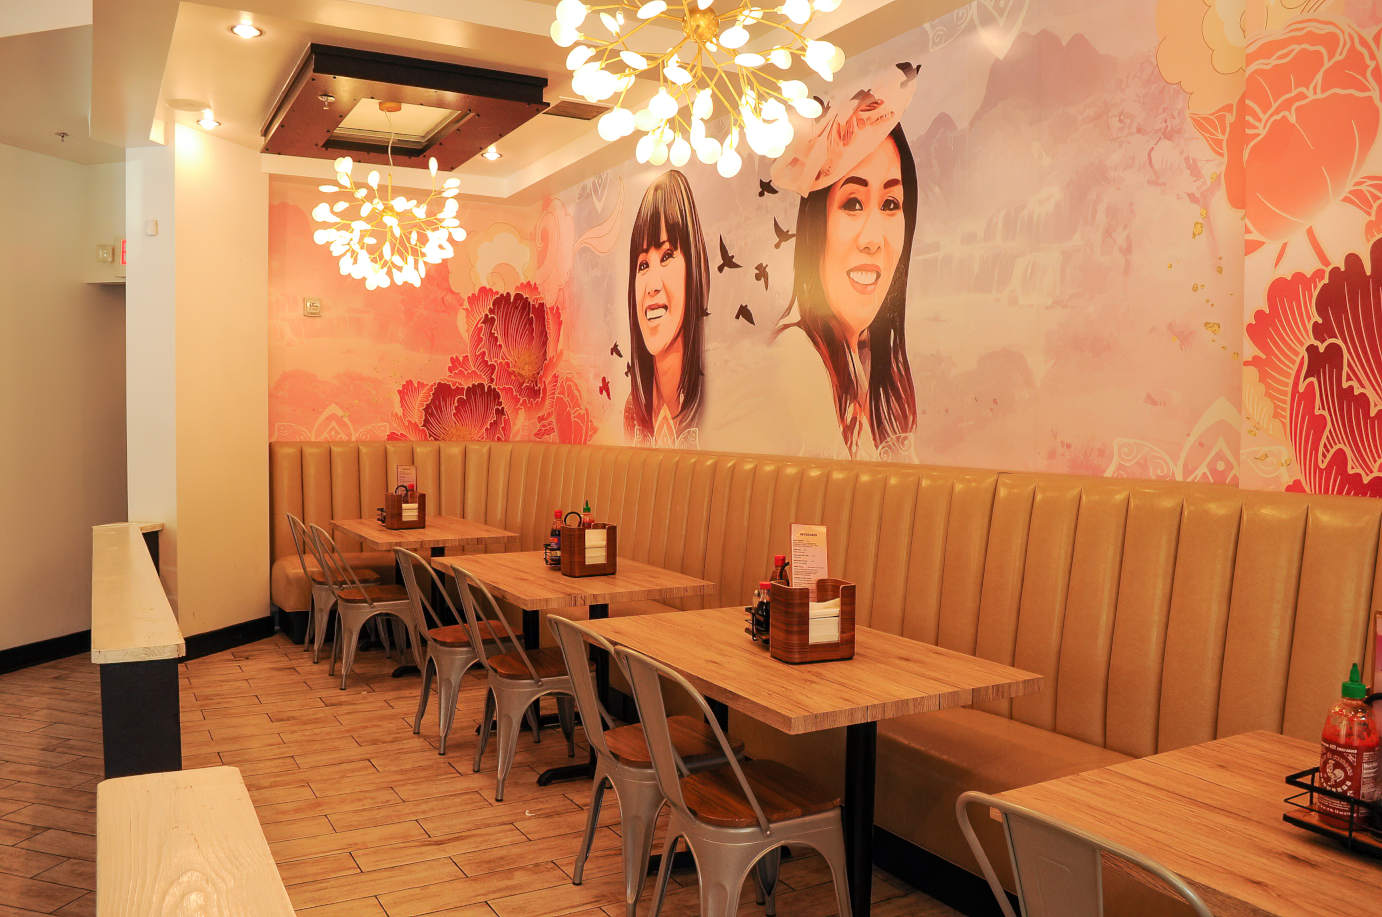 High back banquette seating with tables and chairs by a wall decorated with mural